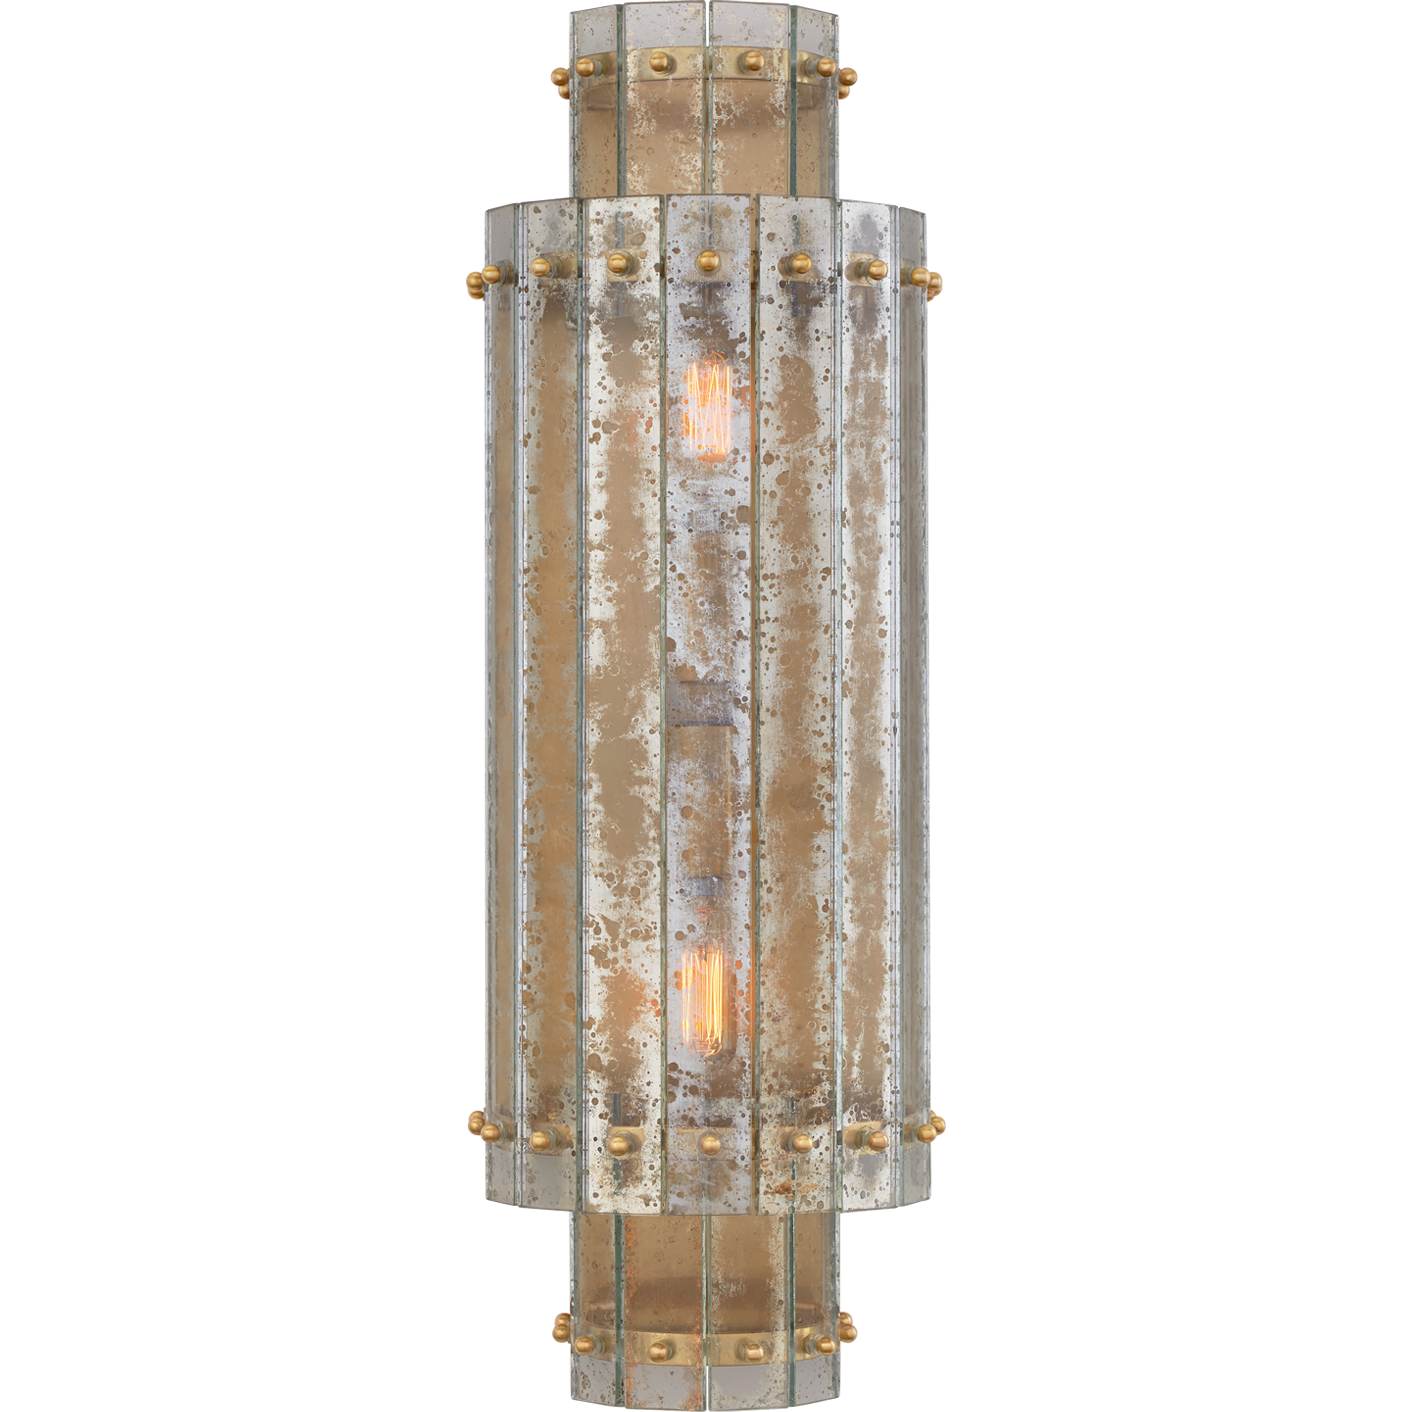 Cadence Large Tiered Sconce